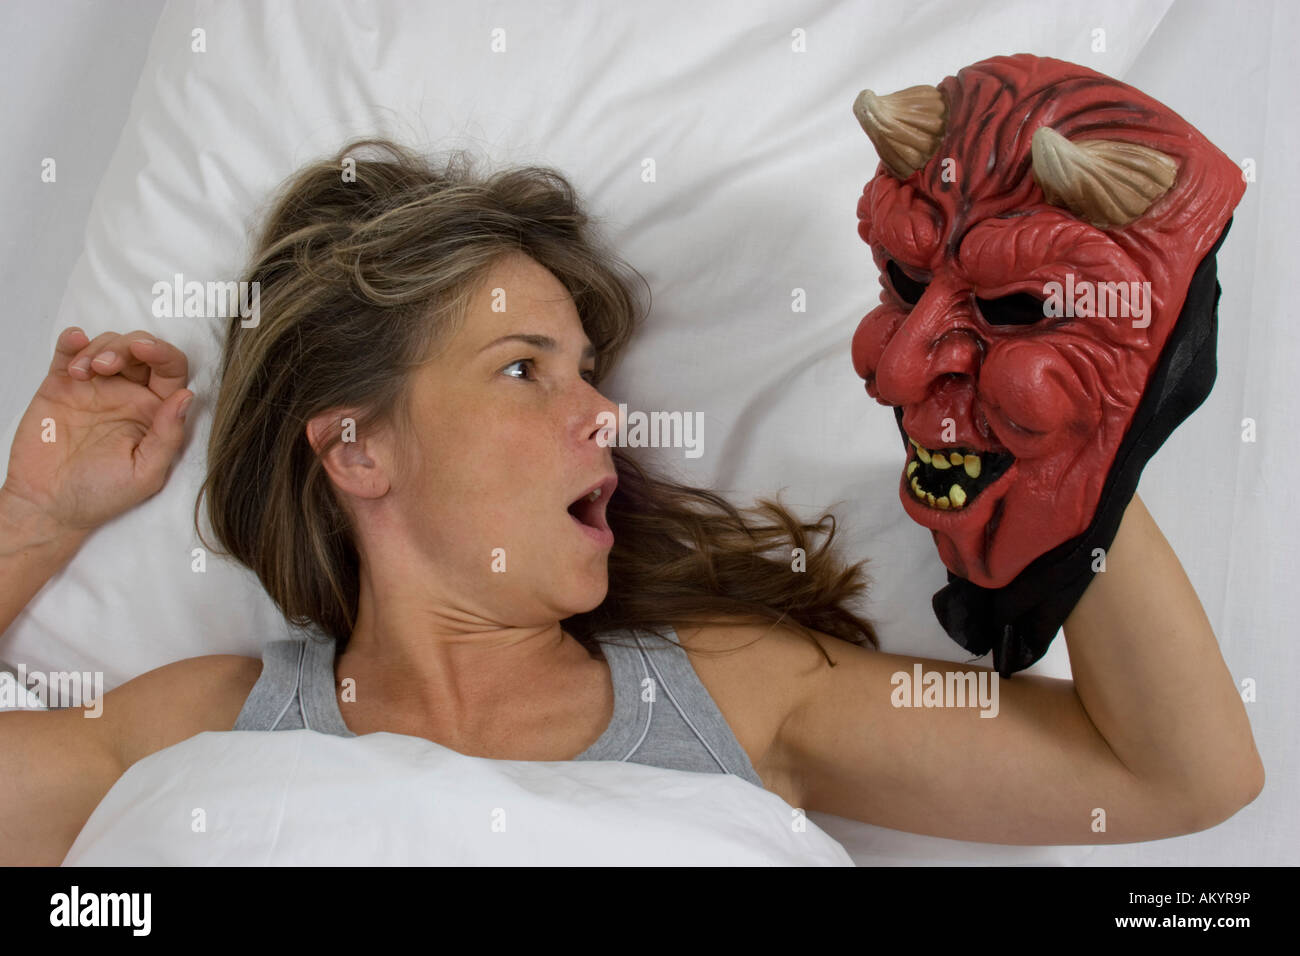 Woman lying in bed, devil mask Stock Photo